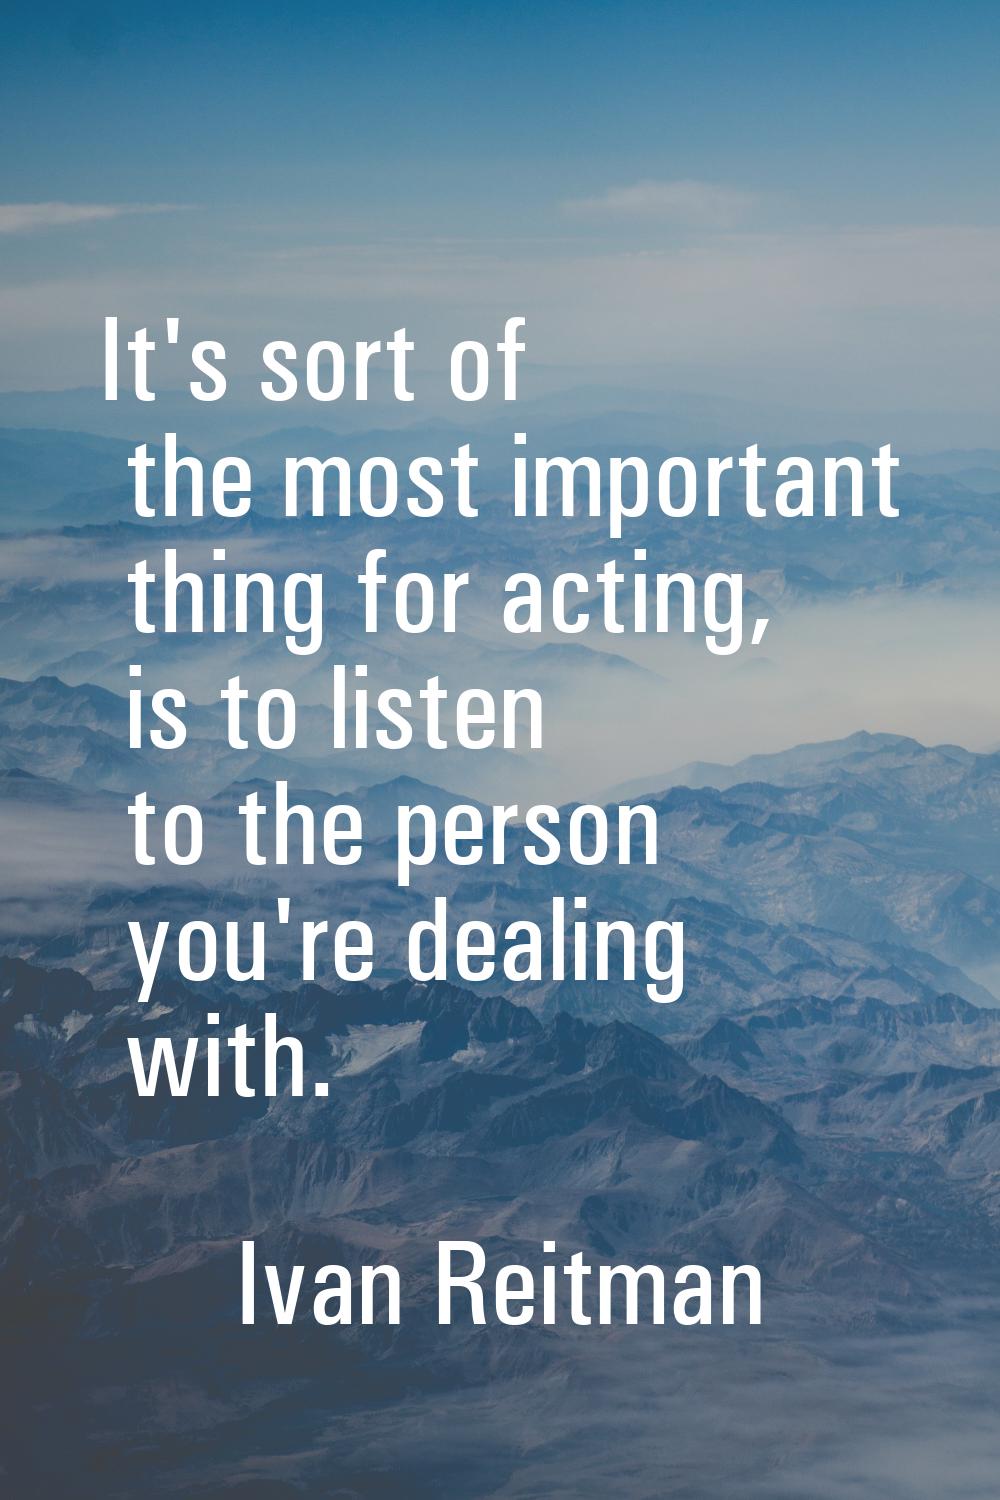 It's sort of the most important thing for acting, is to listen to the person you're dealing with.